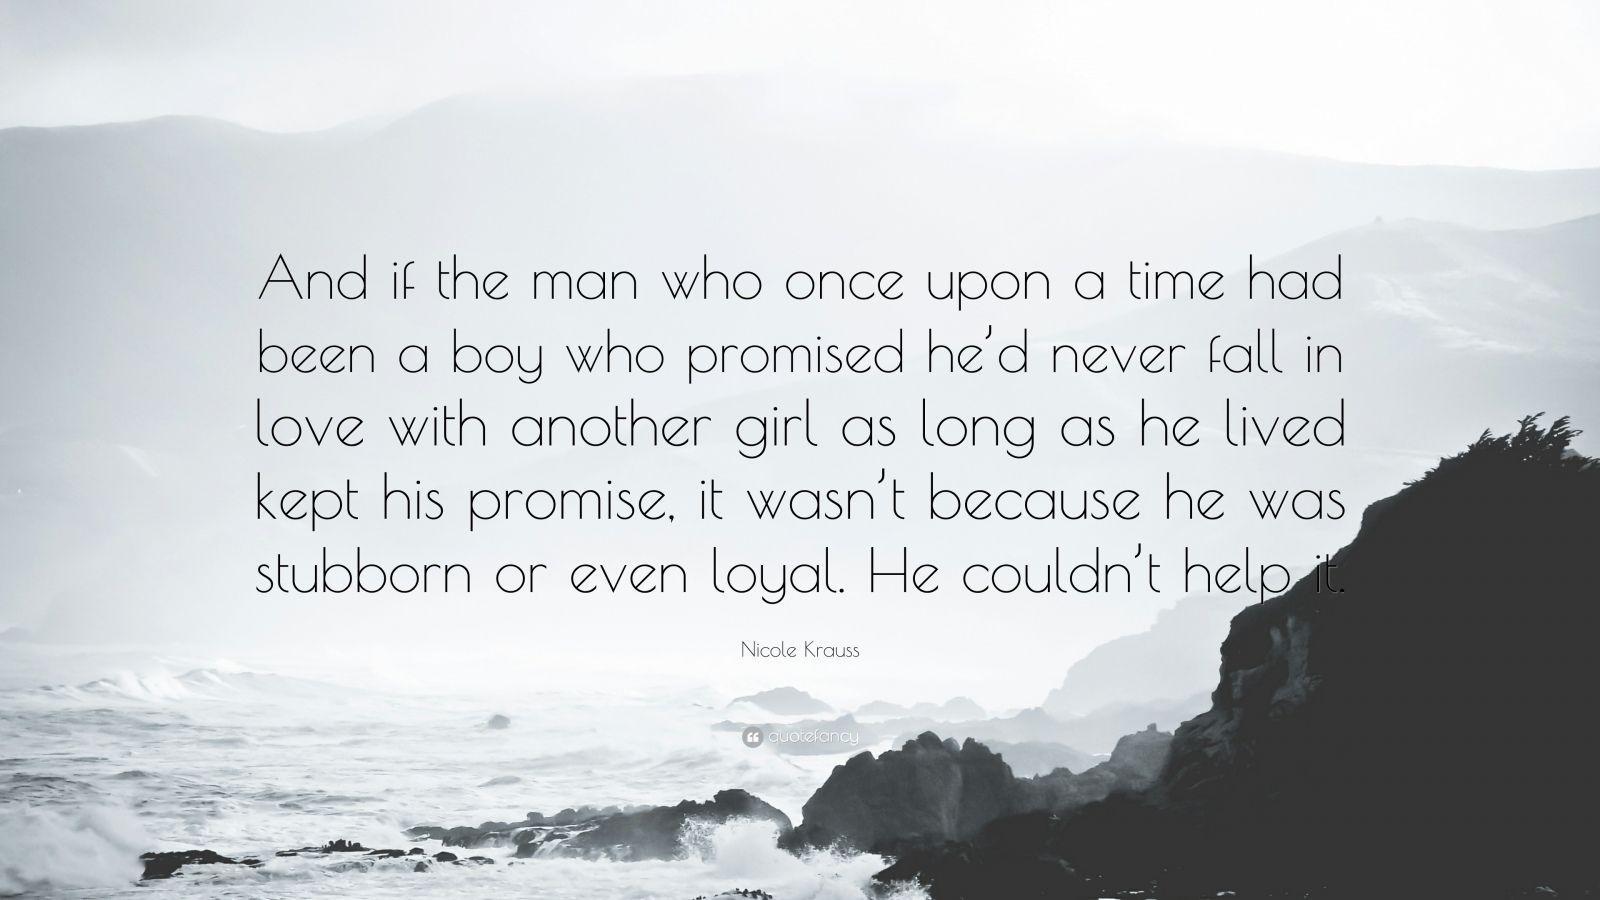 Nicole Krauss Quote “And if the man who once upon a time had been